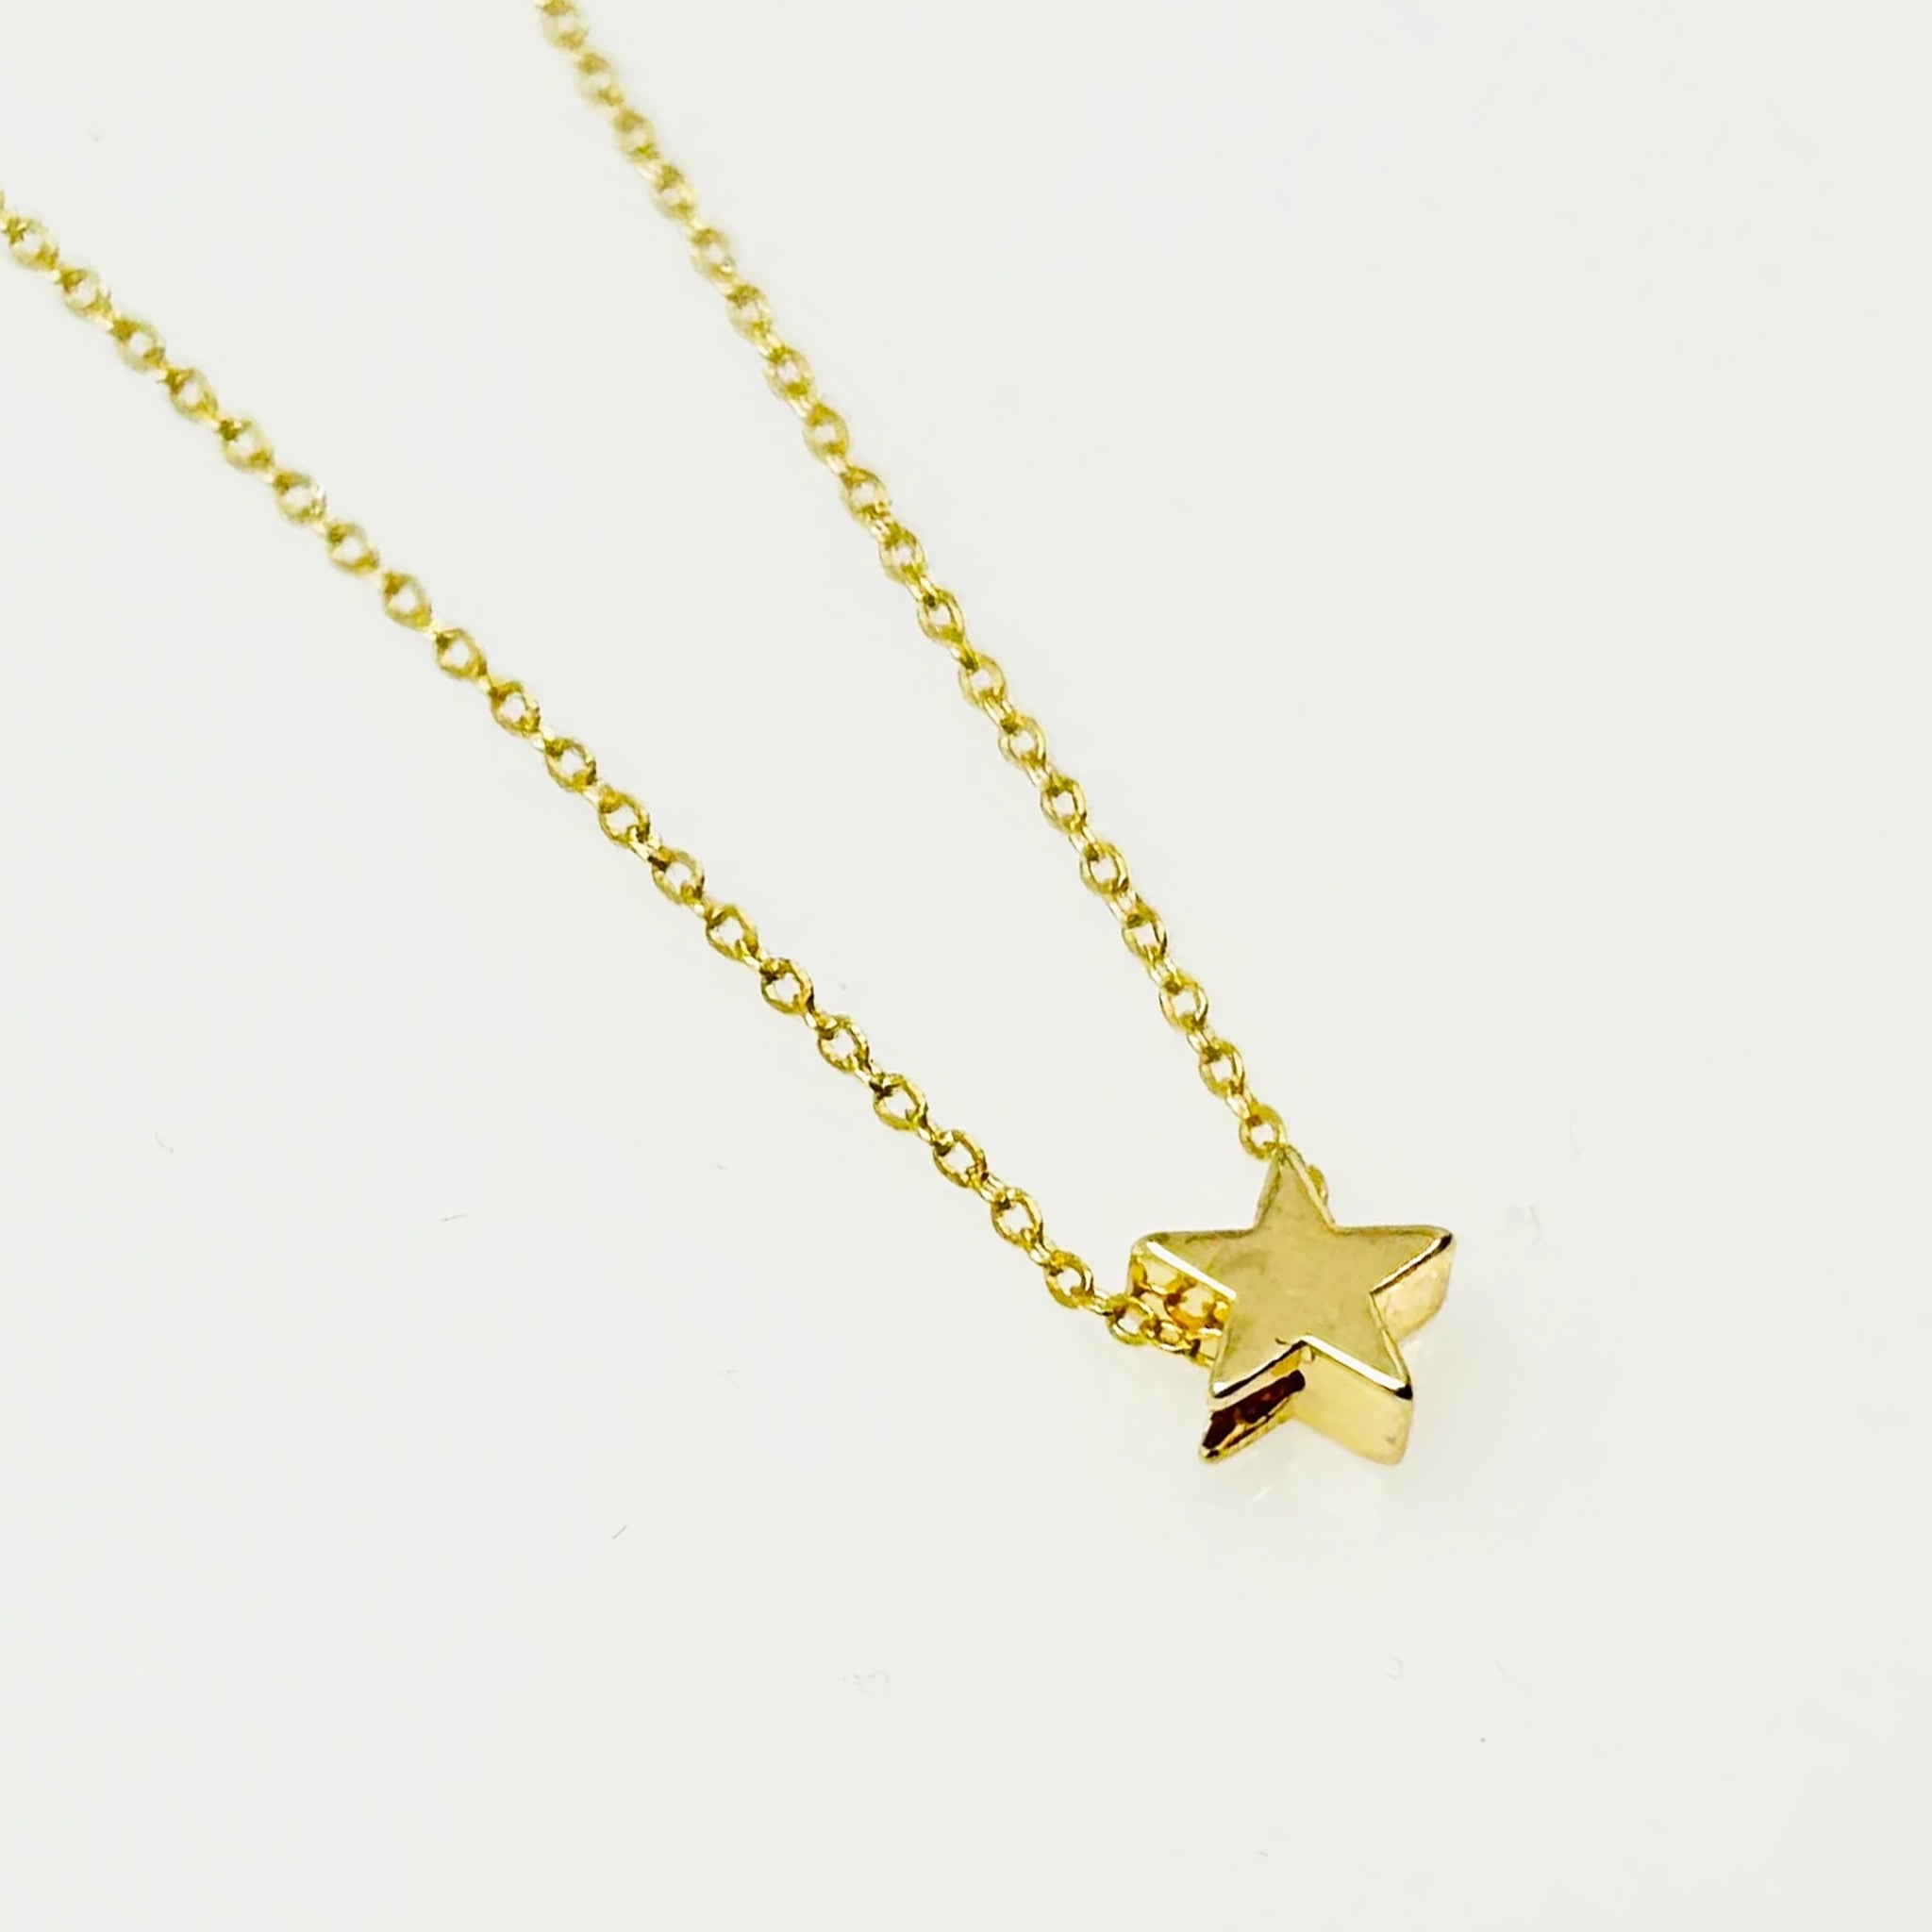 On a white background is a dainty gold chain necklace with a micro star pendant. 